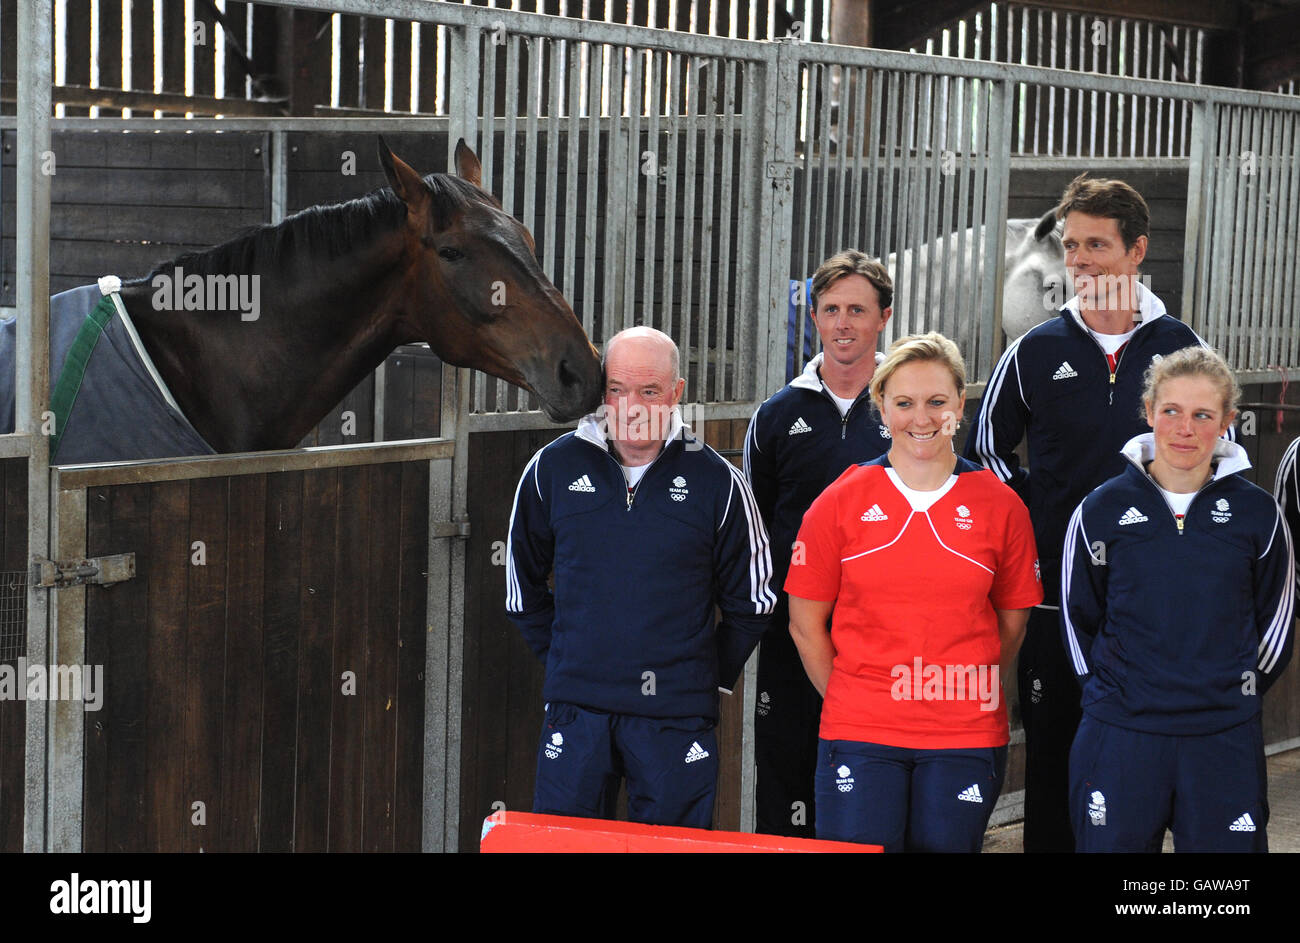 Team GB equestrian athletes (left to right) John Whitaker, Ben Maher, Gemma Tattersall, William Fox-Pitt and Izzy Taylor during the Team GB Equestrian team announcement at the Old Bull Pen, Wiltshire. Stock Photo